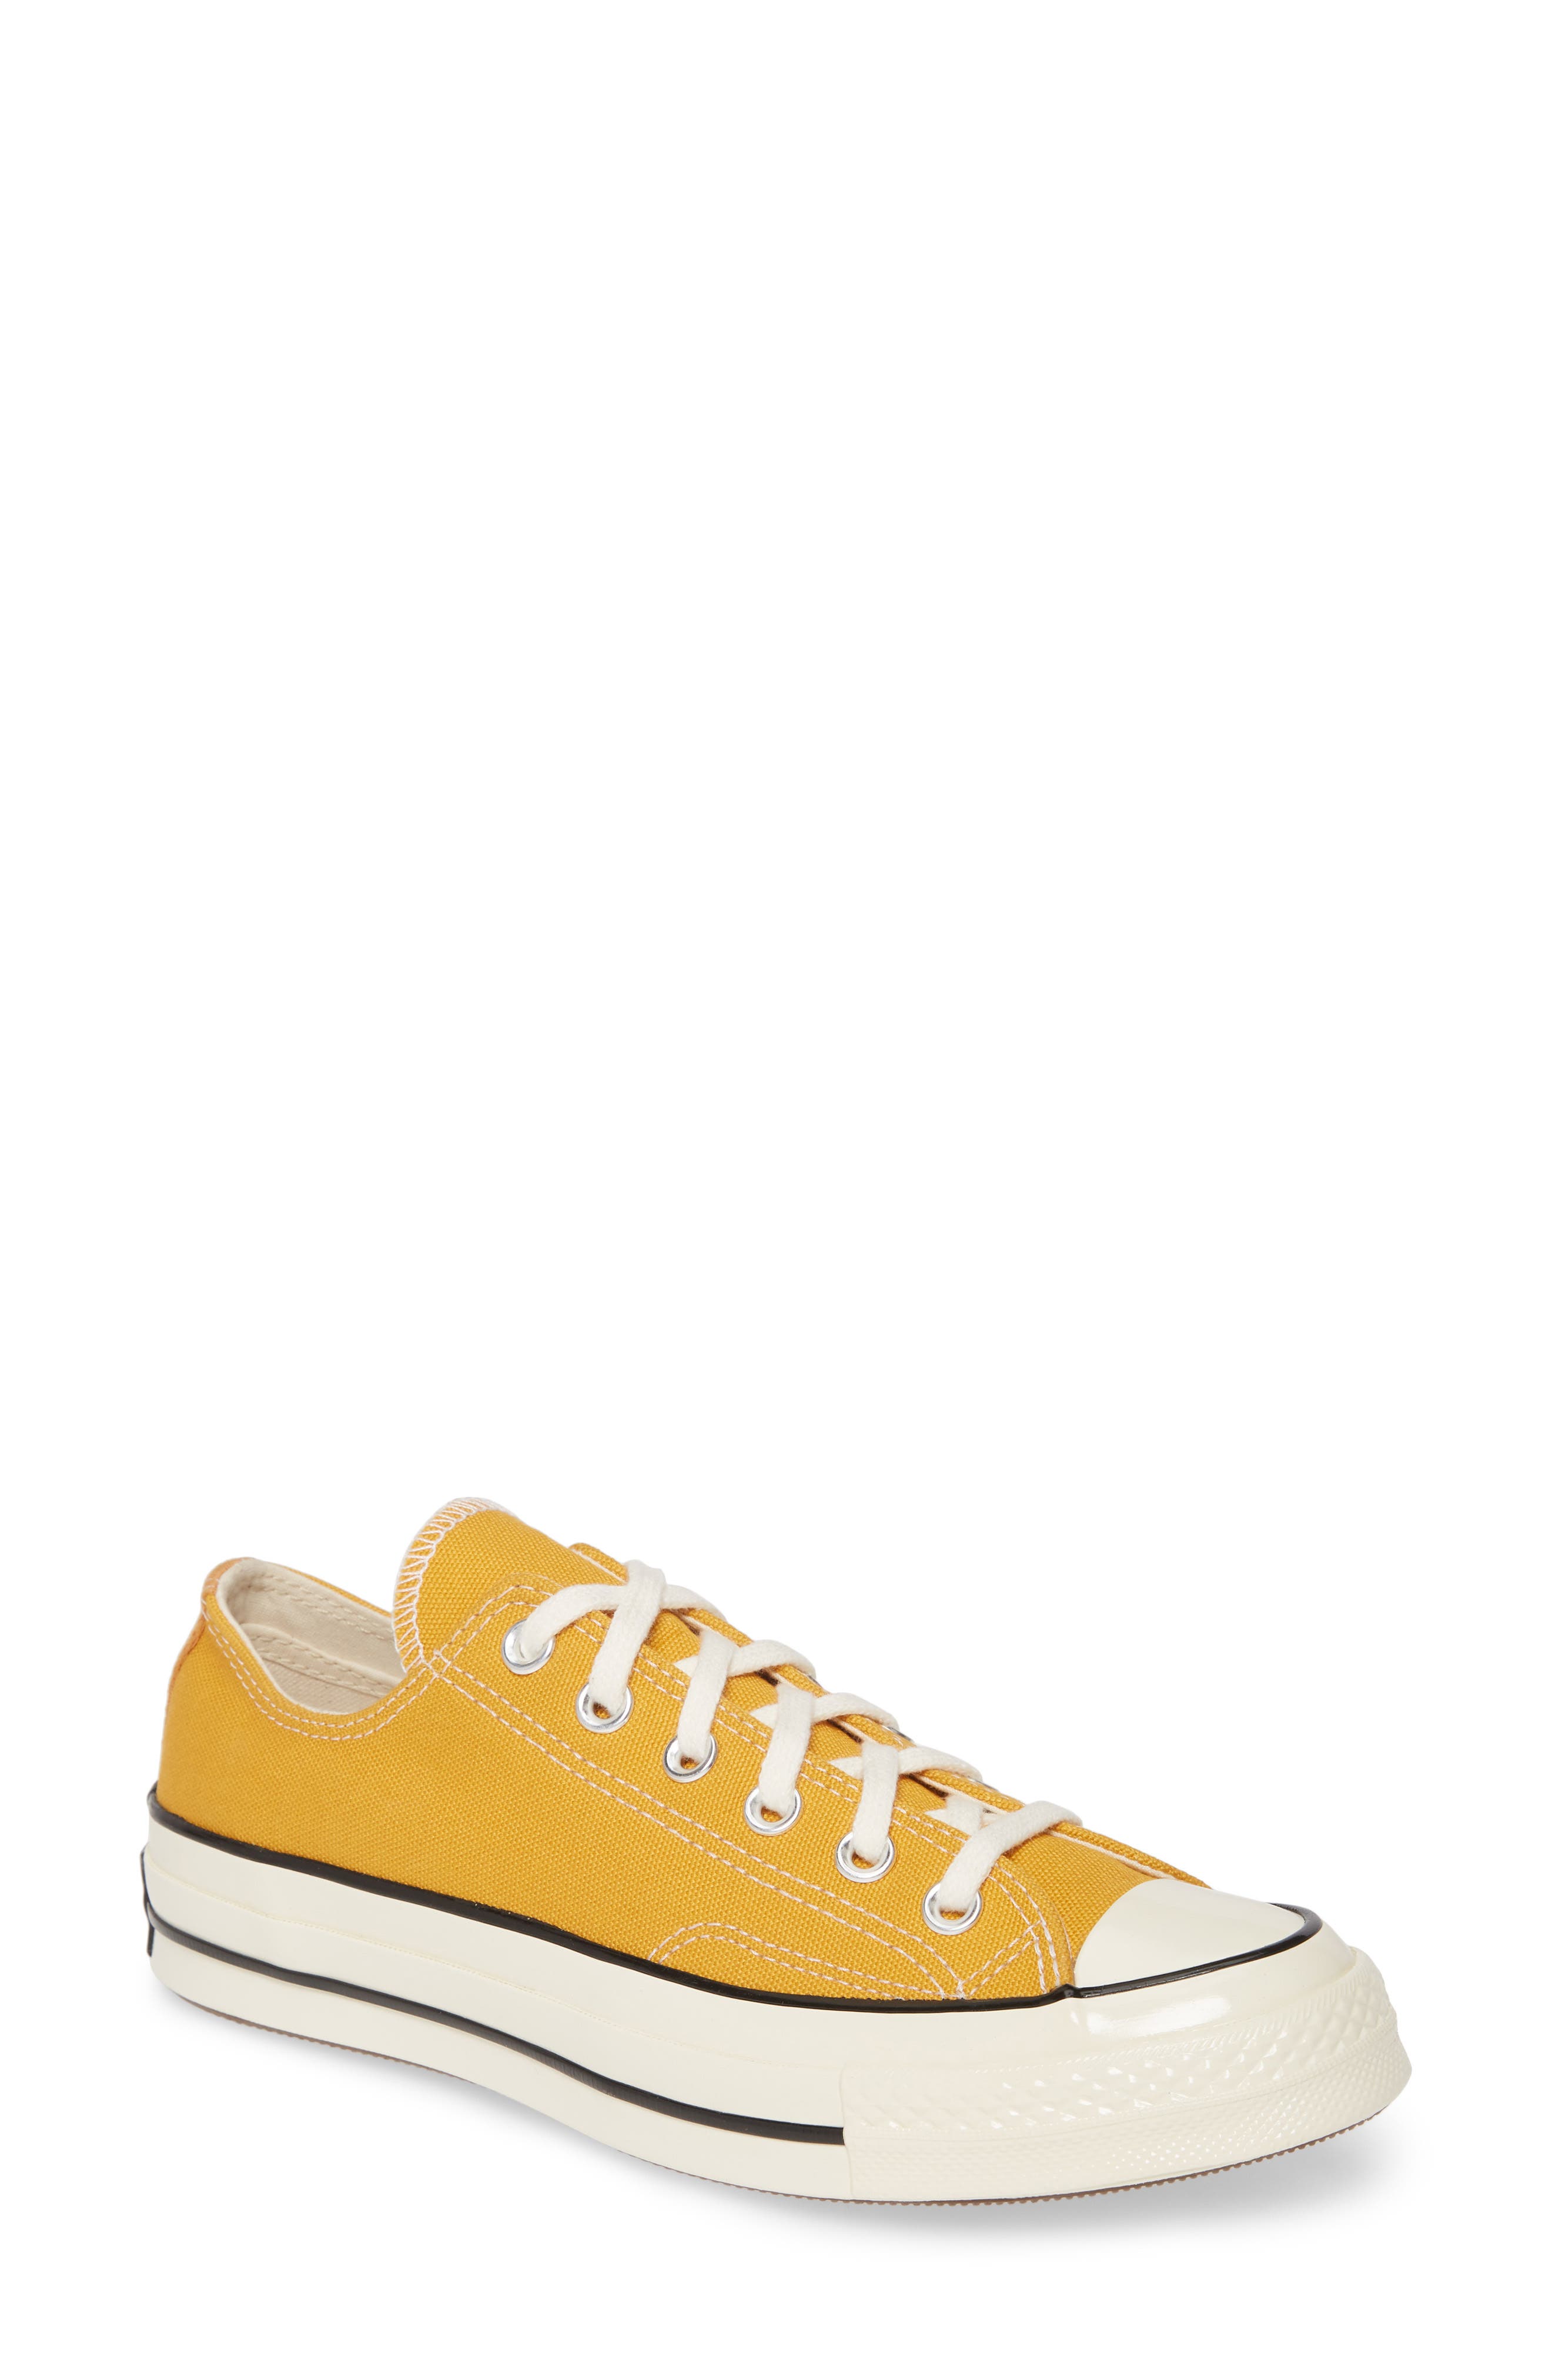 converse chuck taylor 197s ox leather